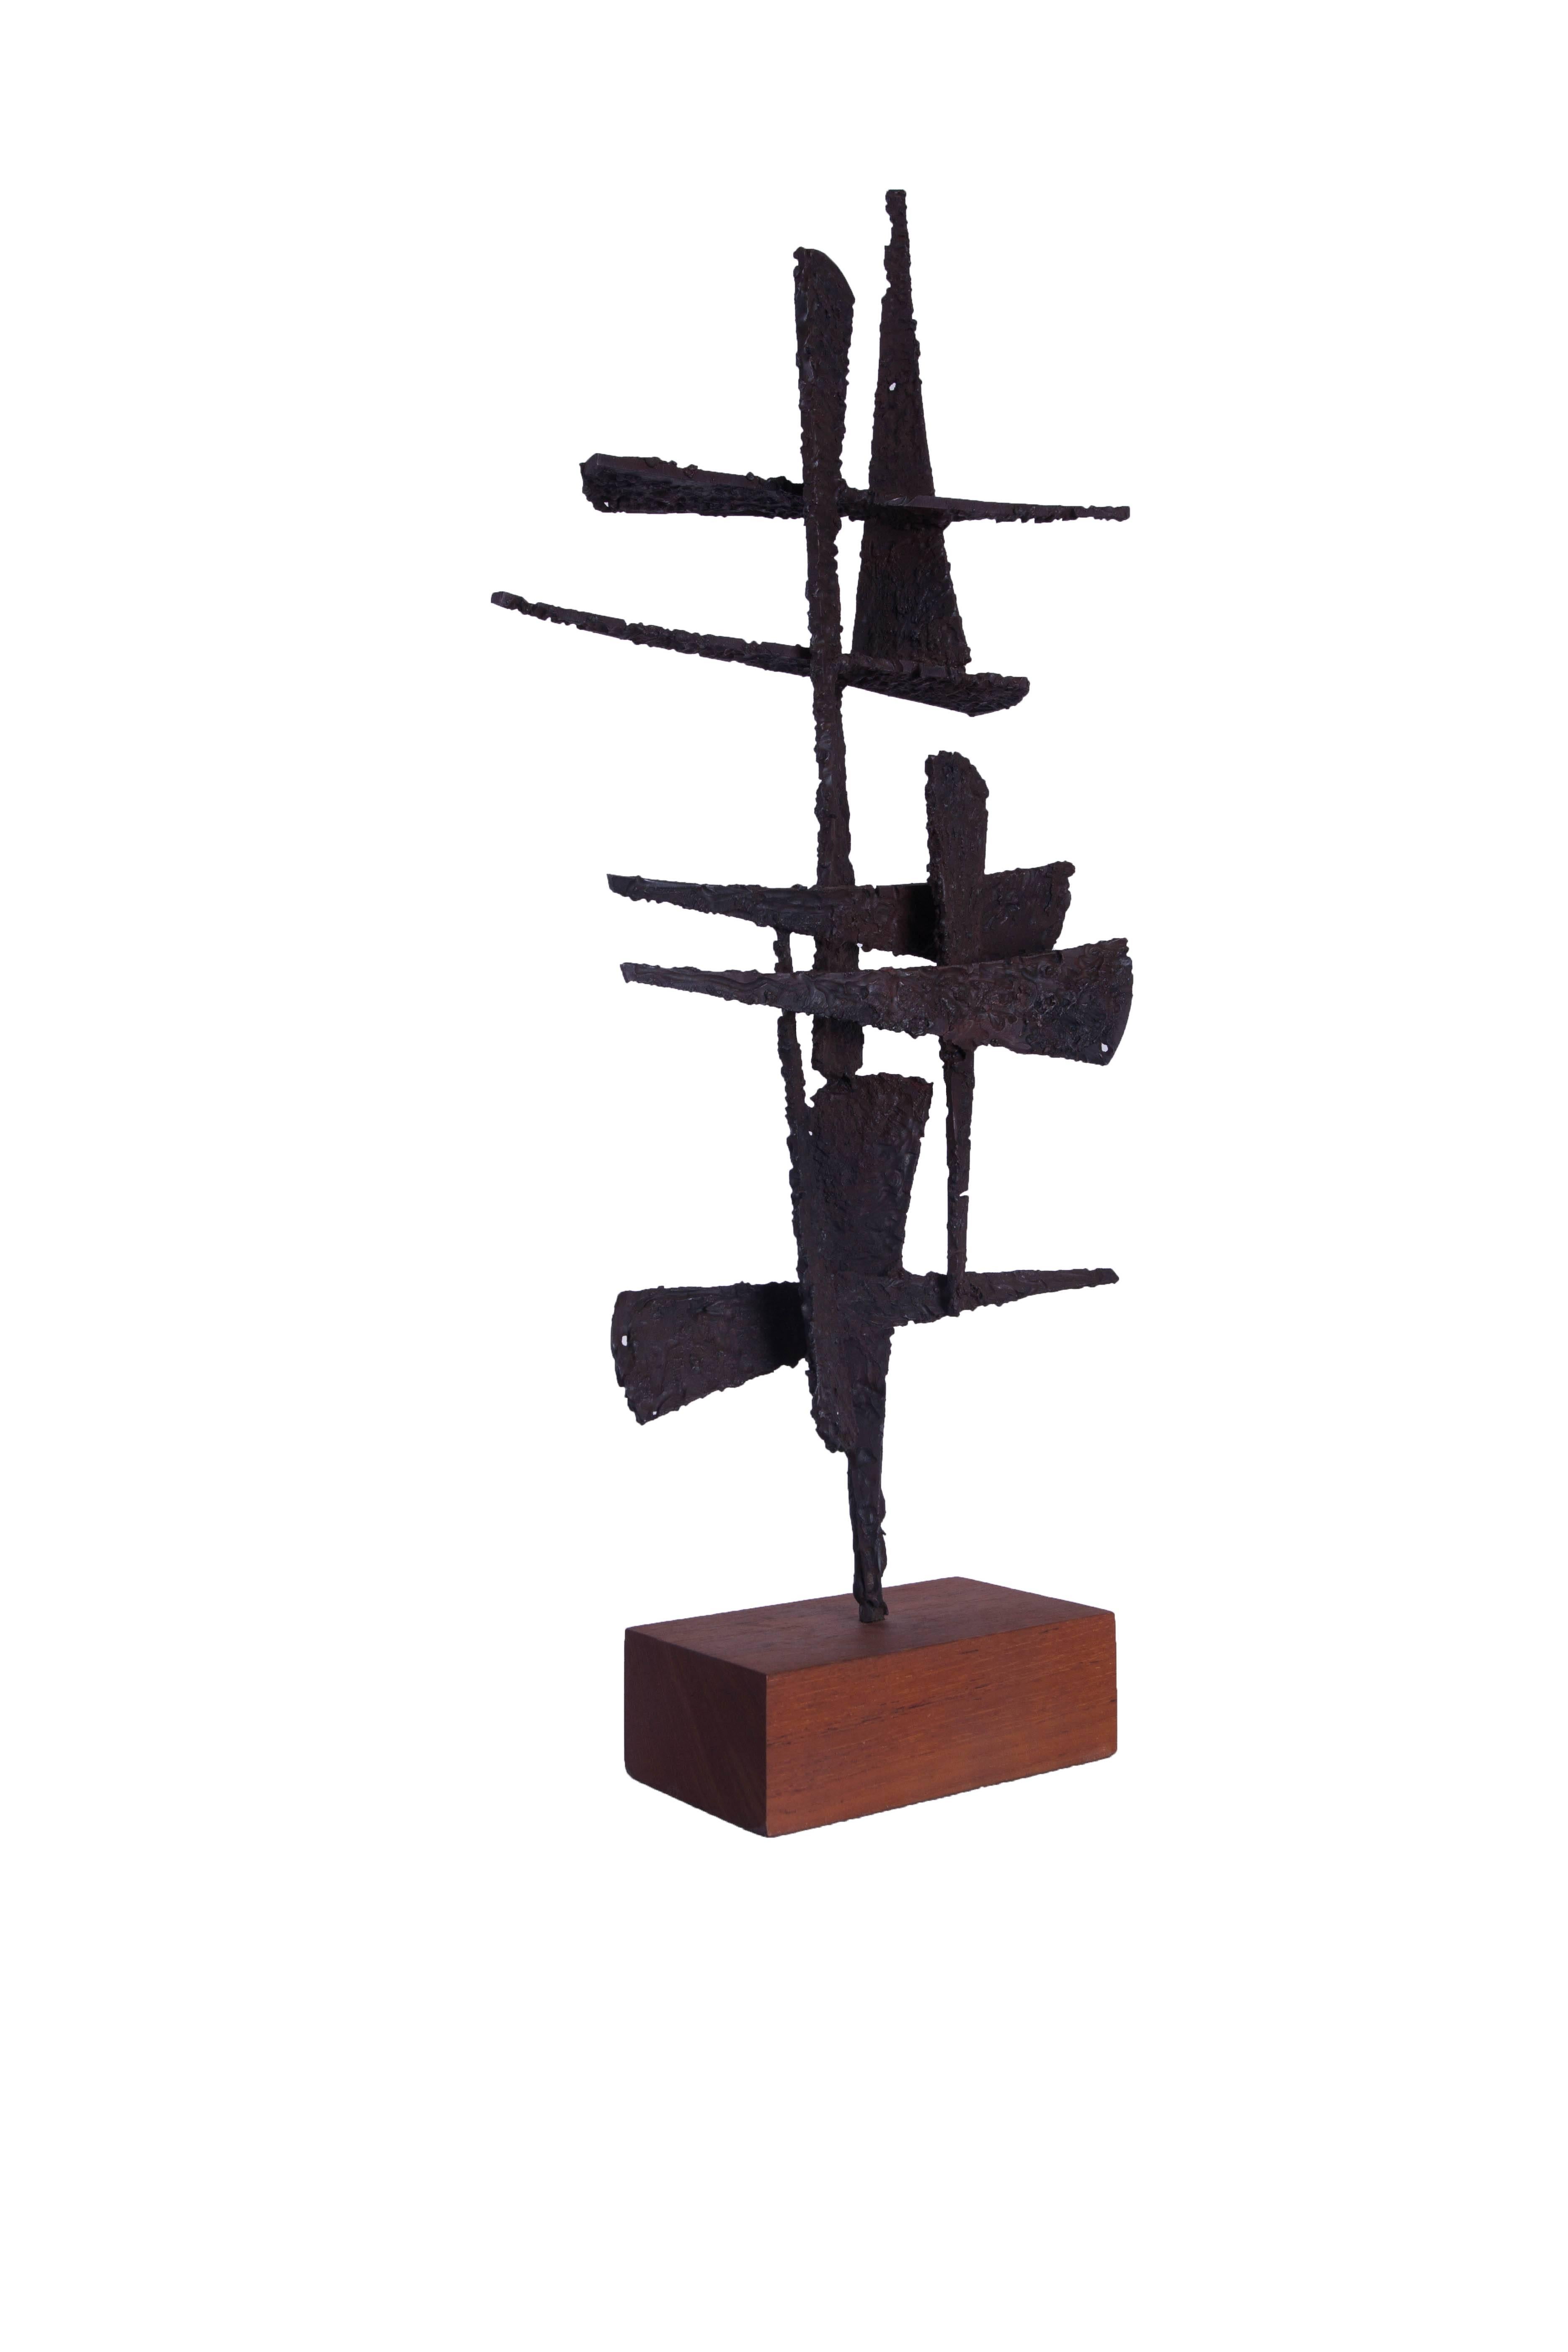 Contemporary Torch-Cut Steel Brutal Sculpture by American Artist Joey Vaiasuso 2